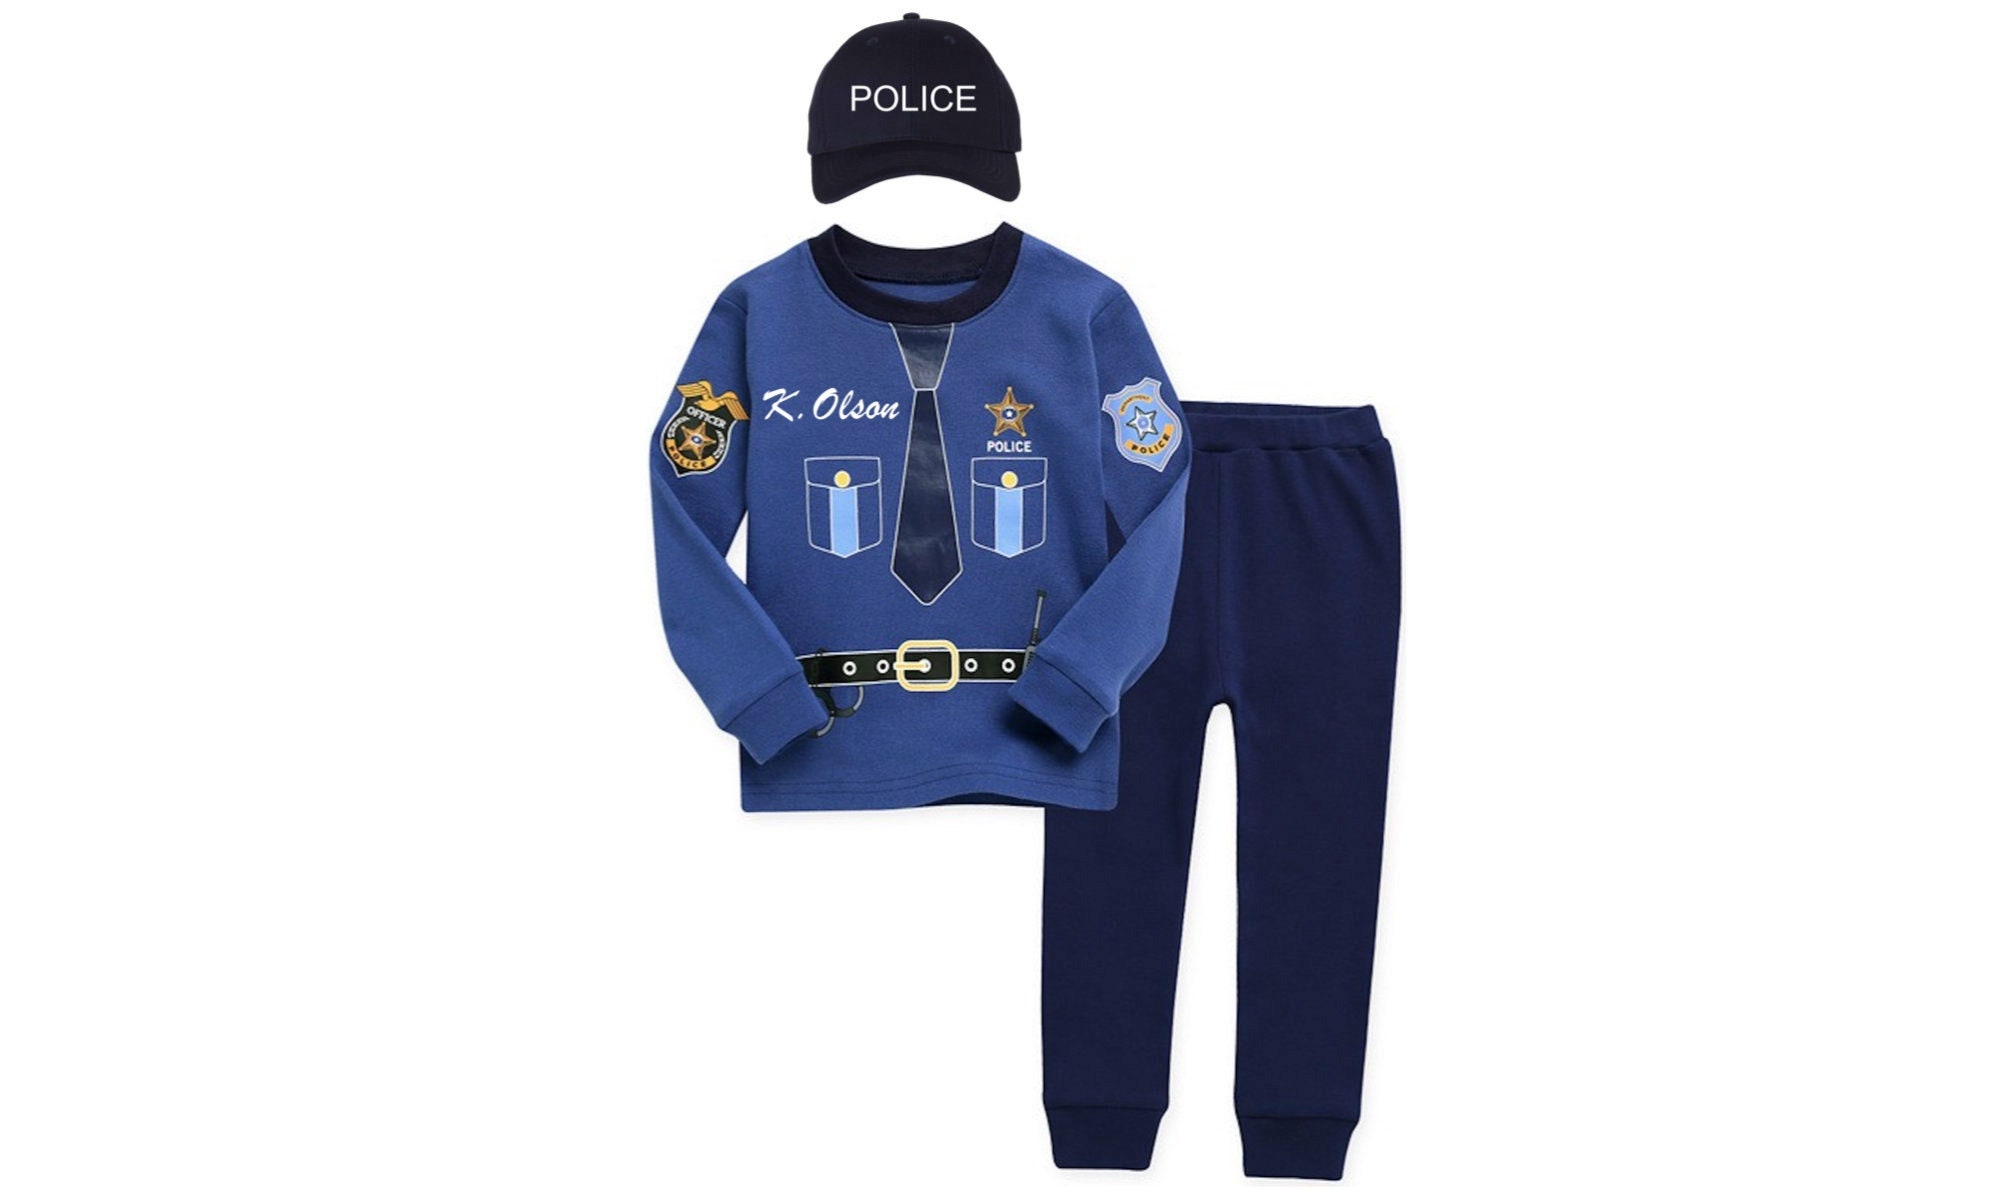 Police Costume Set - Embroidery Personalized Uniform - Includes FREE Custom  Embroidered Thin Blue Line Bag ($35 value)!